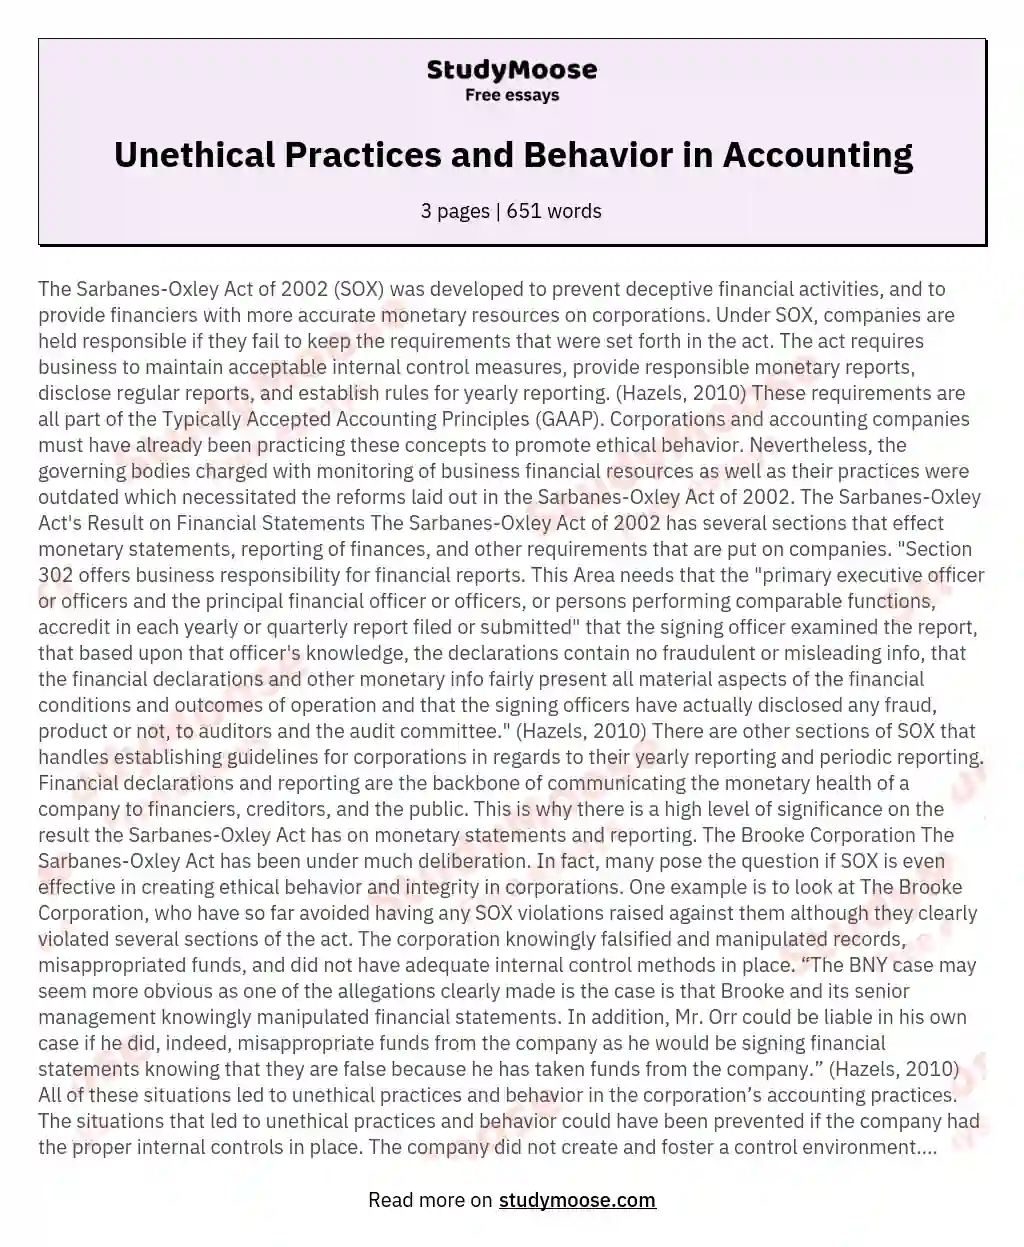 Unethical Practices and Behavior in Accounting essay